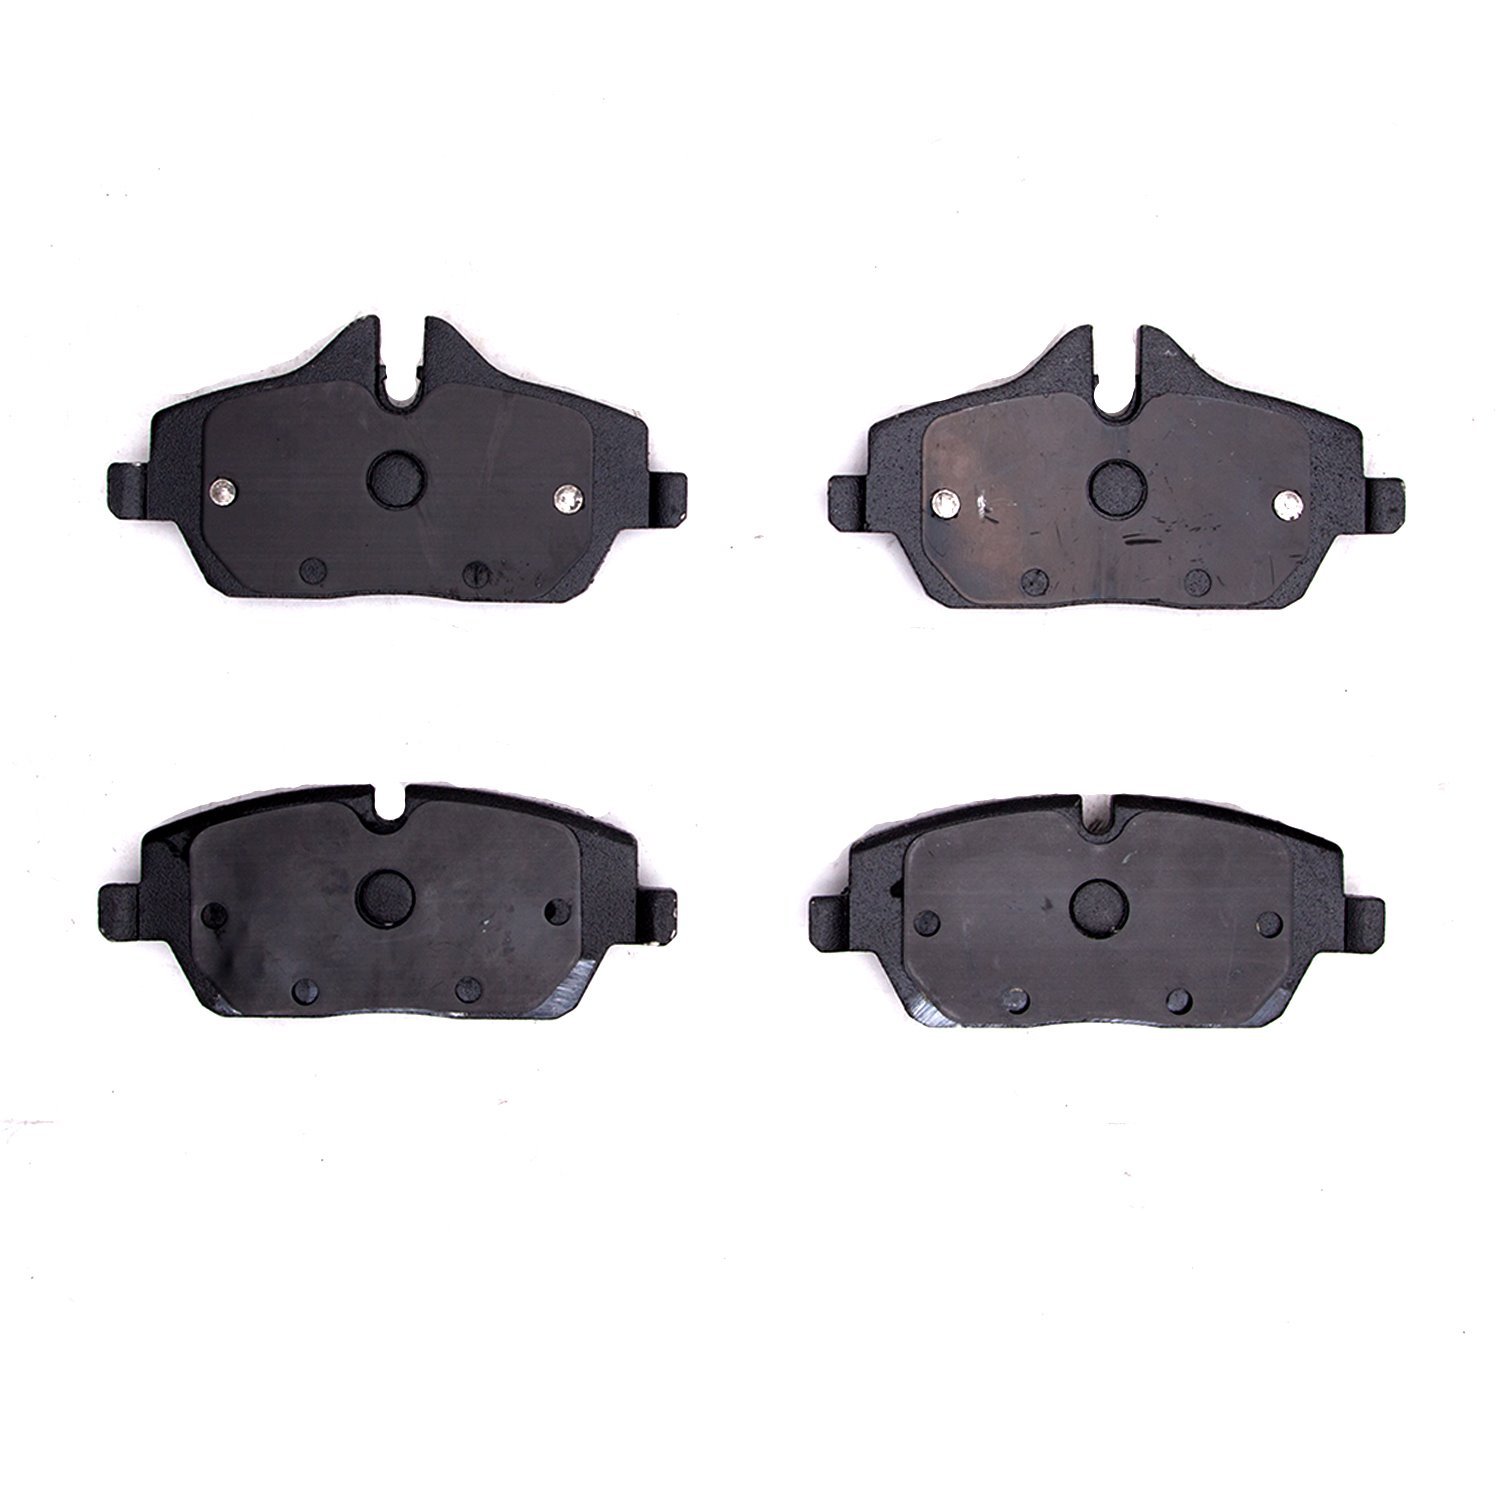 1551-1308-00 5000 Advanced Low-Metallic Brake Pads, Fits Select Multiple Makes/Models, Position: Front